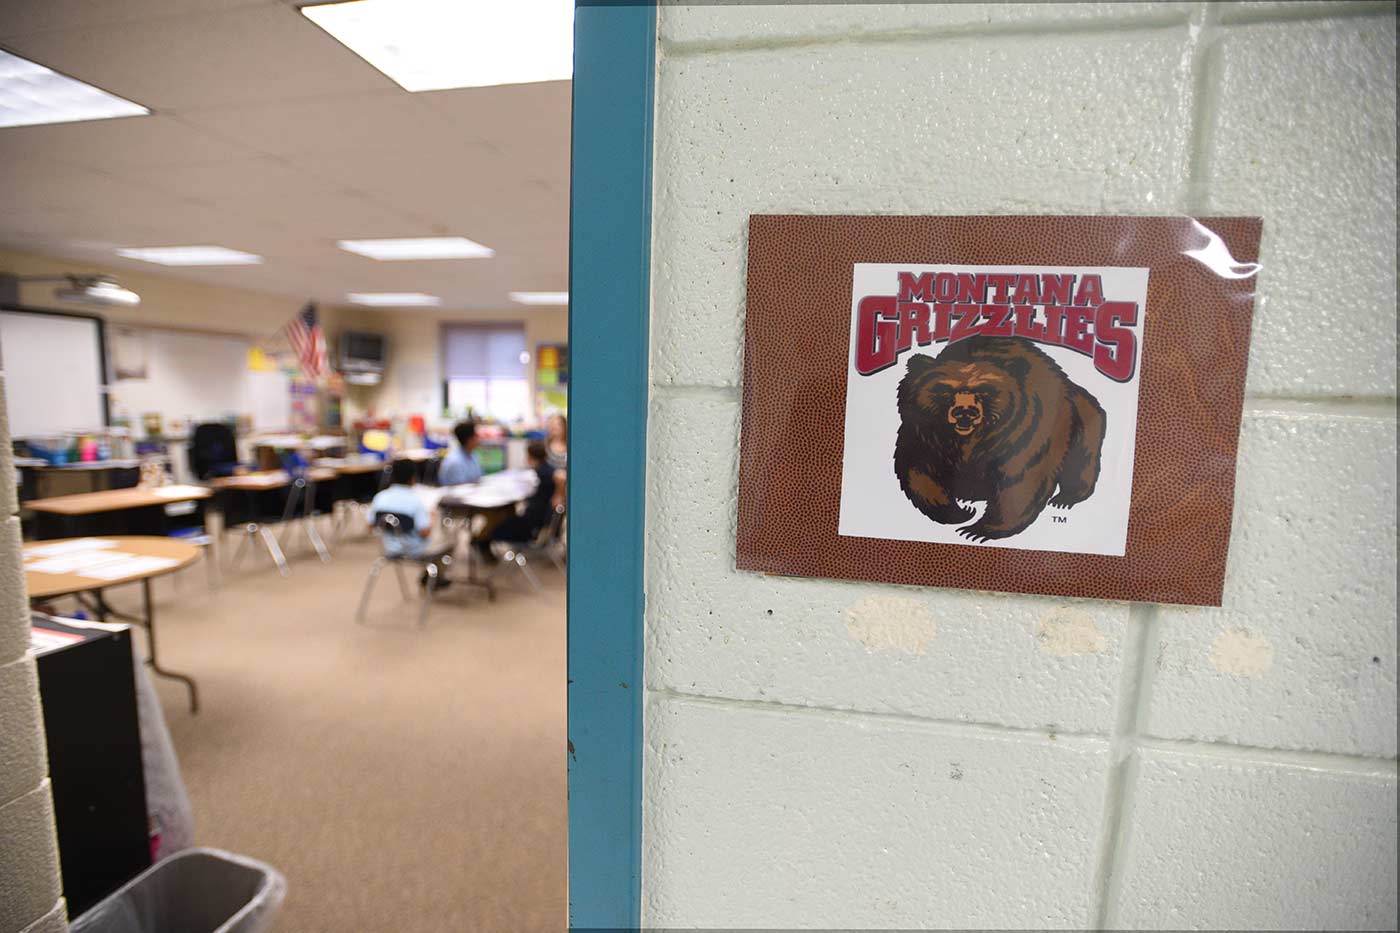 Natchaug classroom with a montana grizzlies sign outside the door